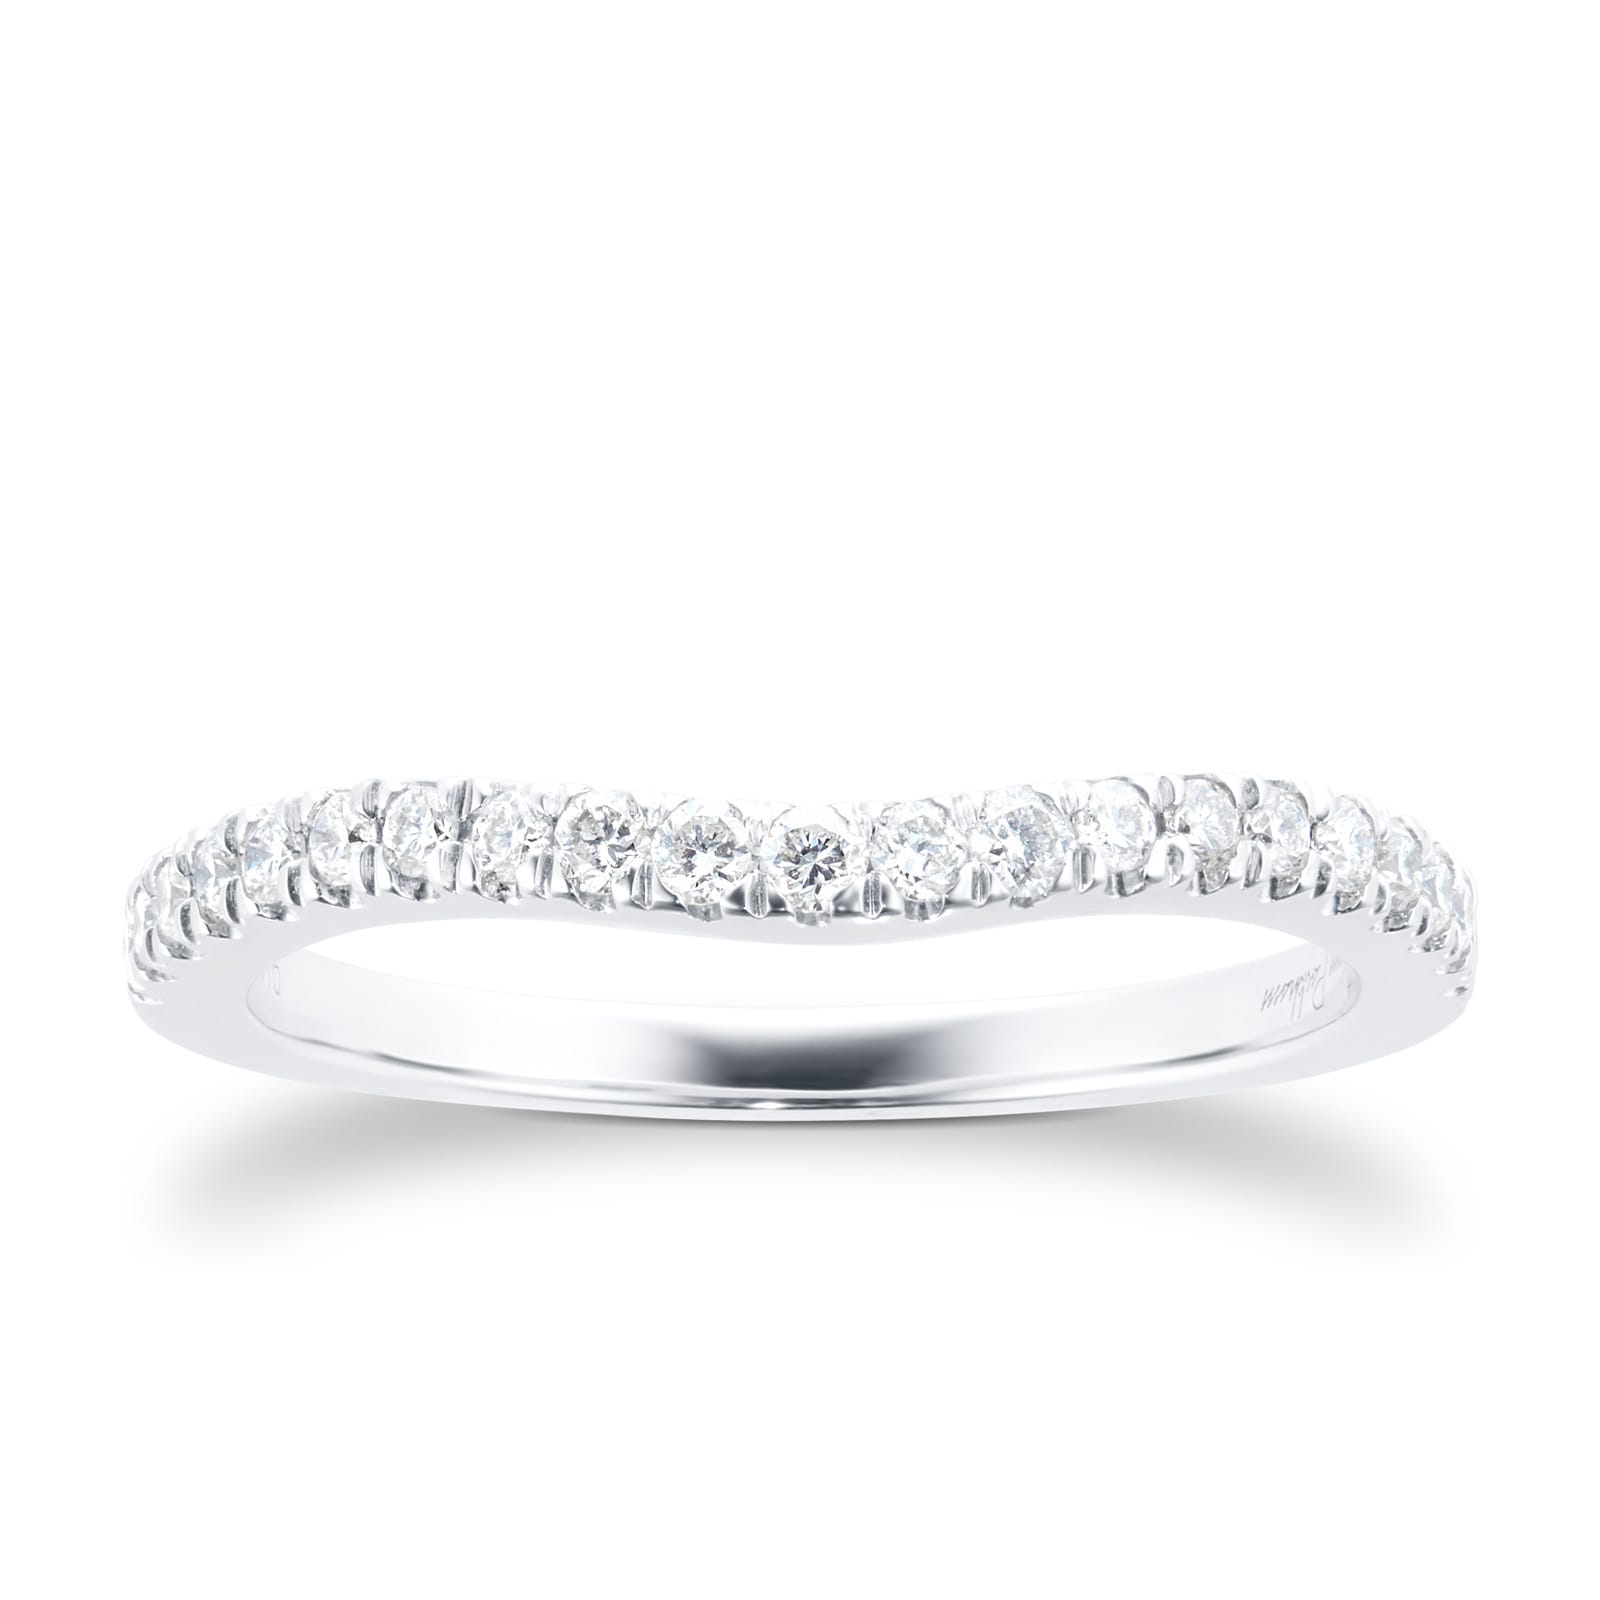 Brilliant Cut 0.23 Carat Total Weight Contour Wedding Ring In 18 Carat White Gold - Ring Size I